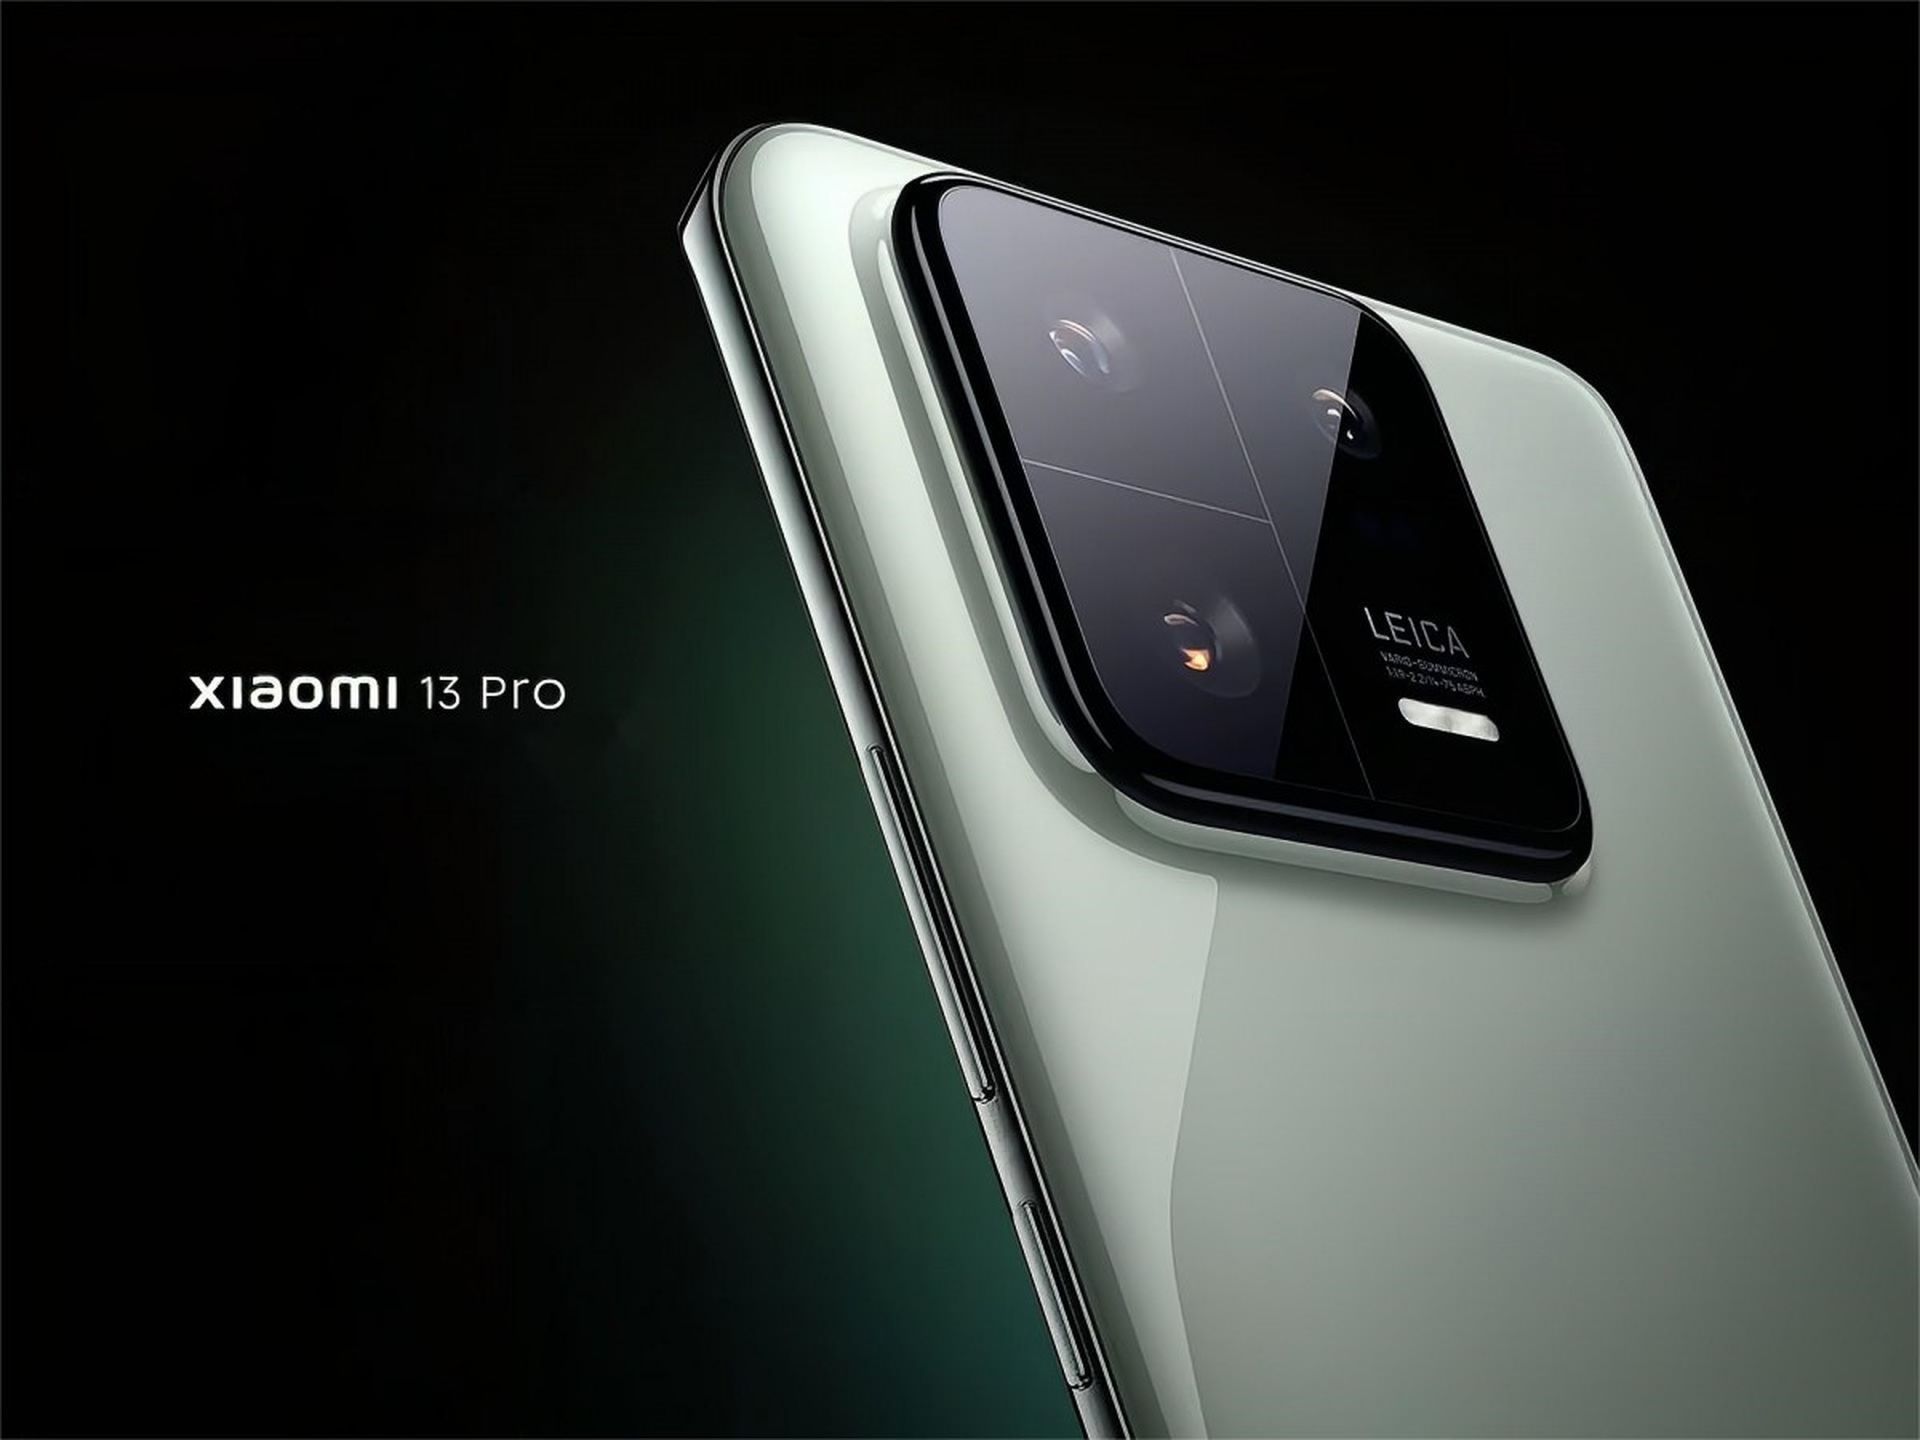 Xiaomi 13 Pro and Xiaomi 13: Specs, price and release date